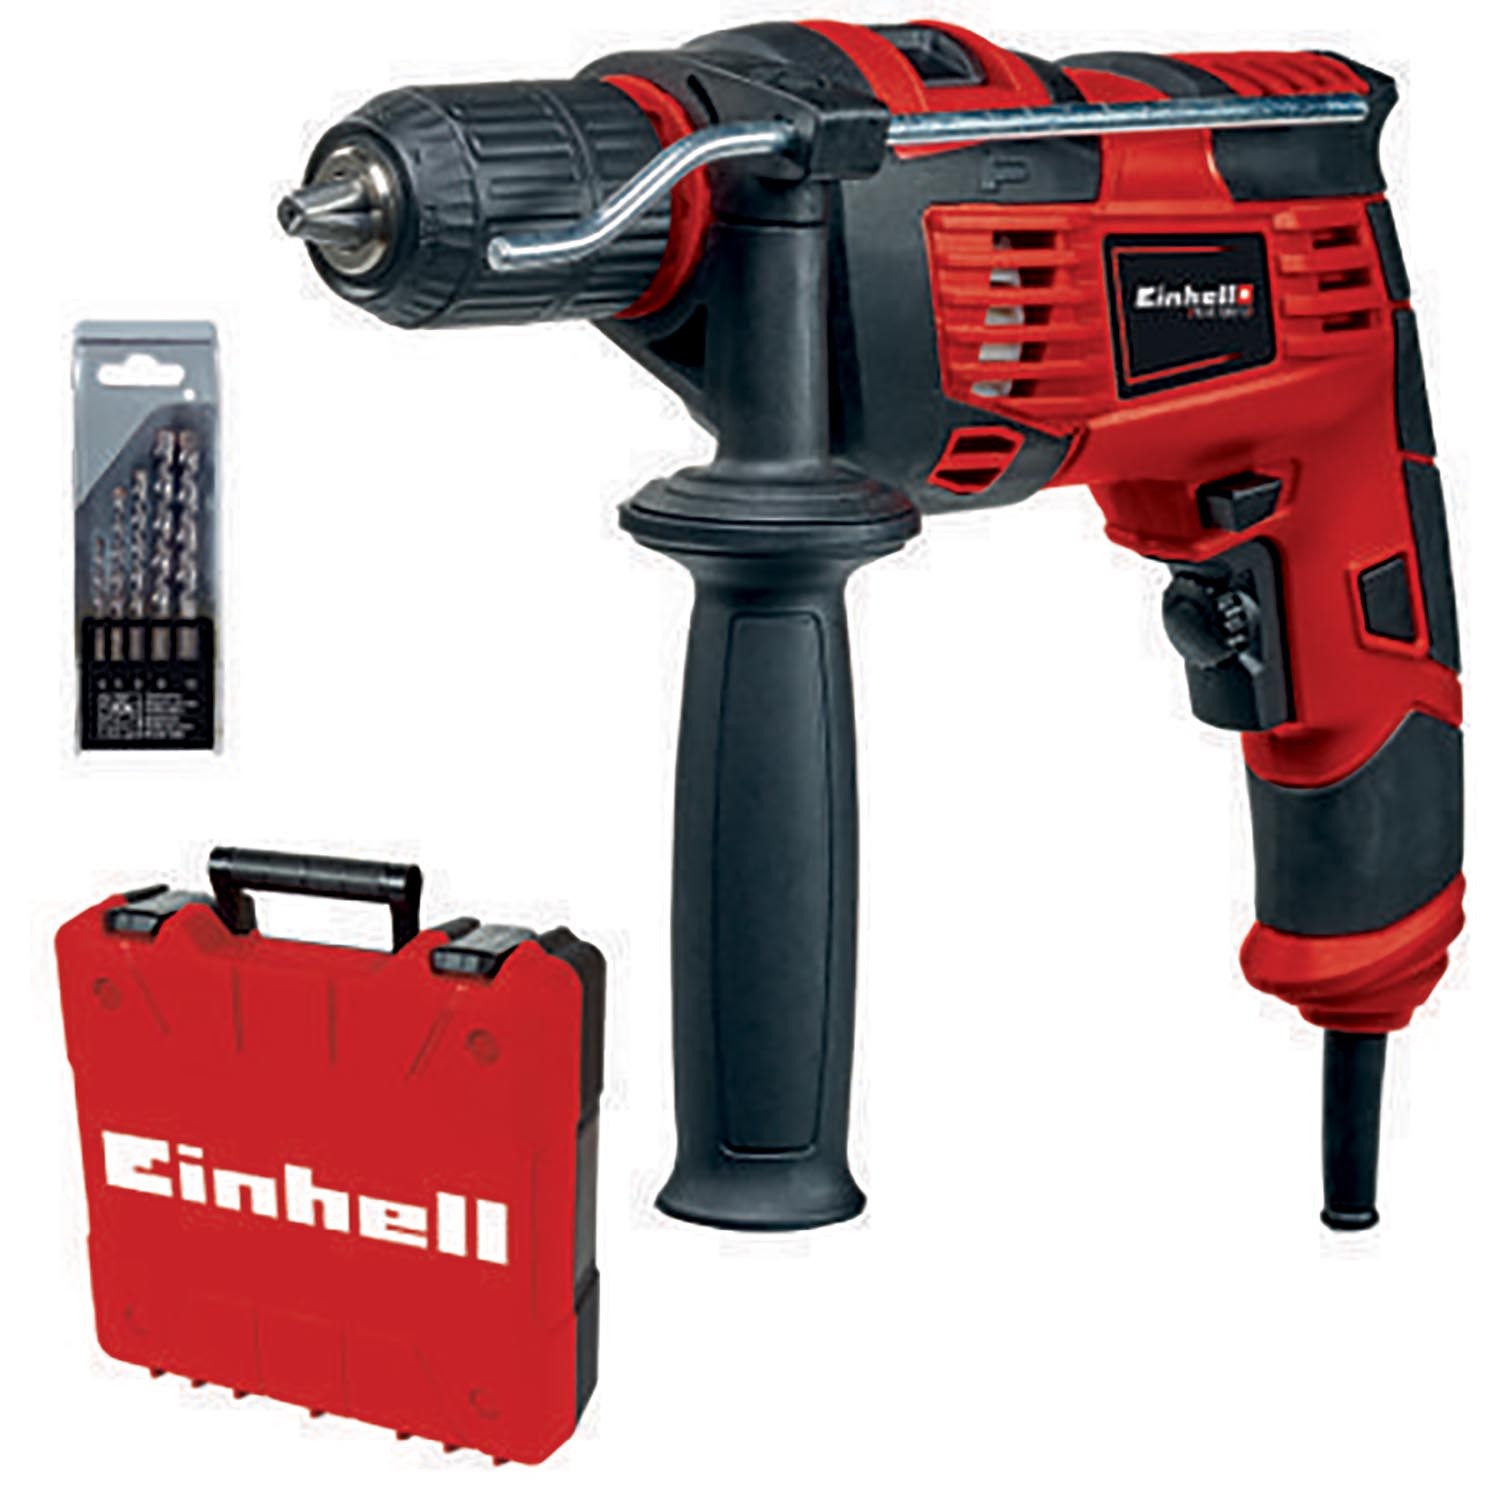 Einhell Impact Drill with Bit Set and Case Image 4